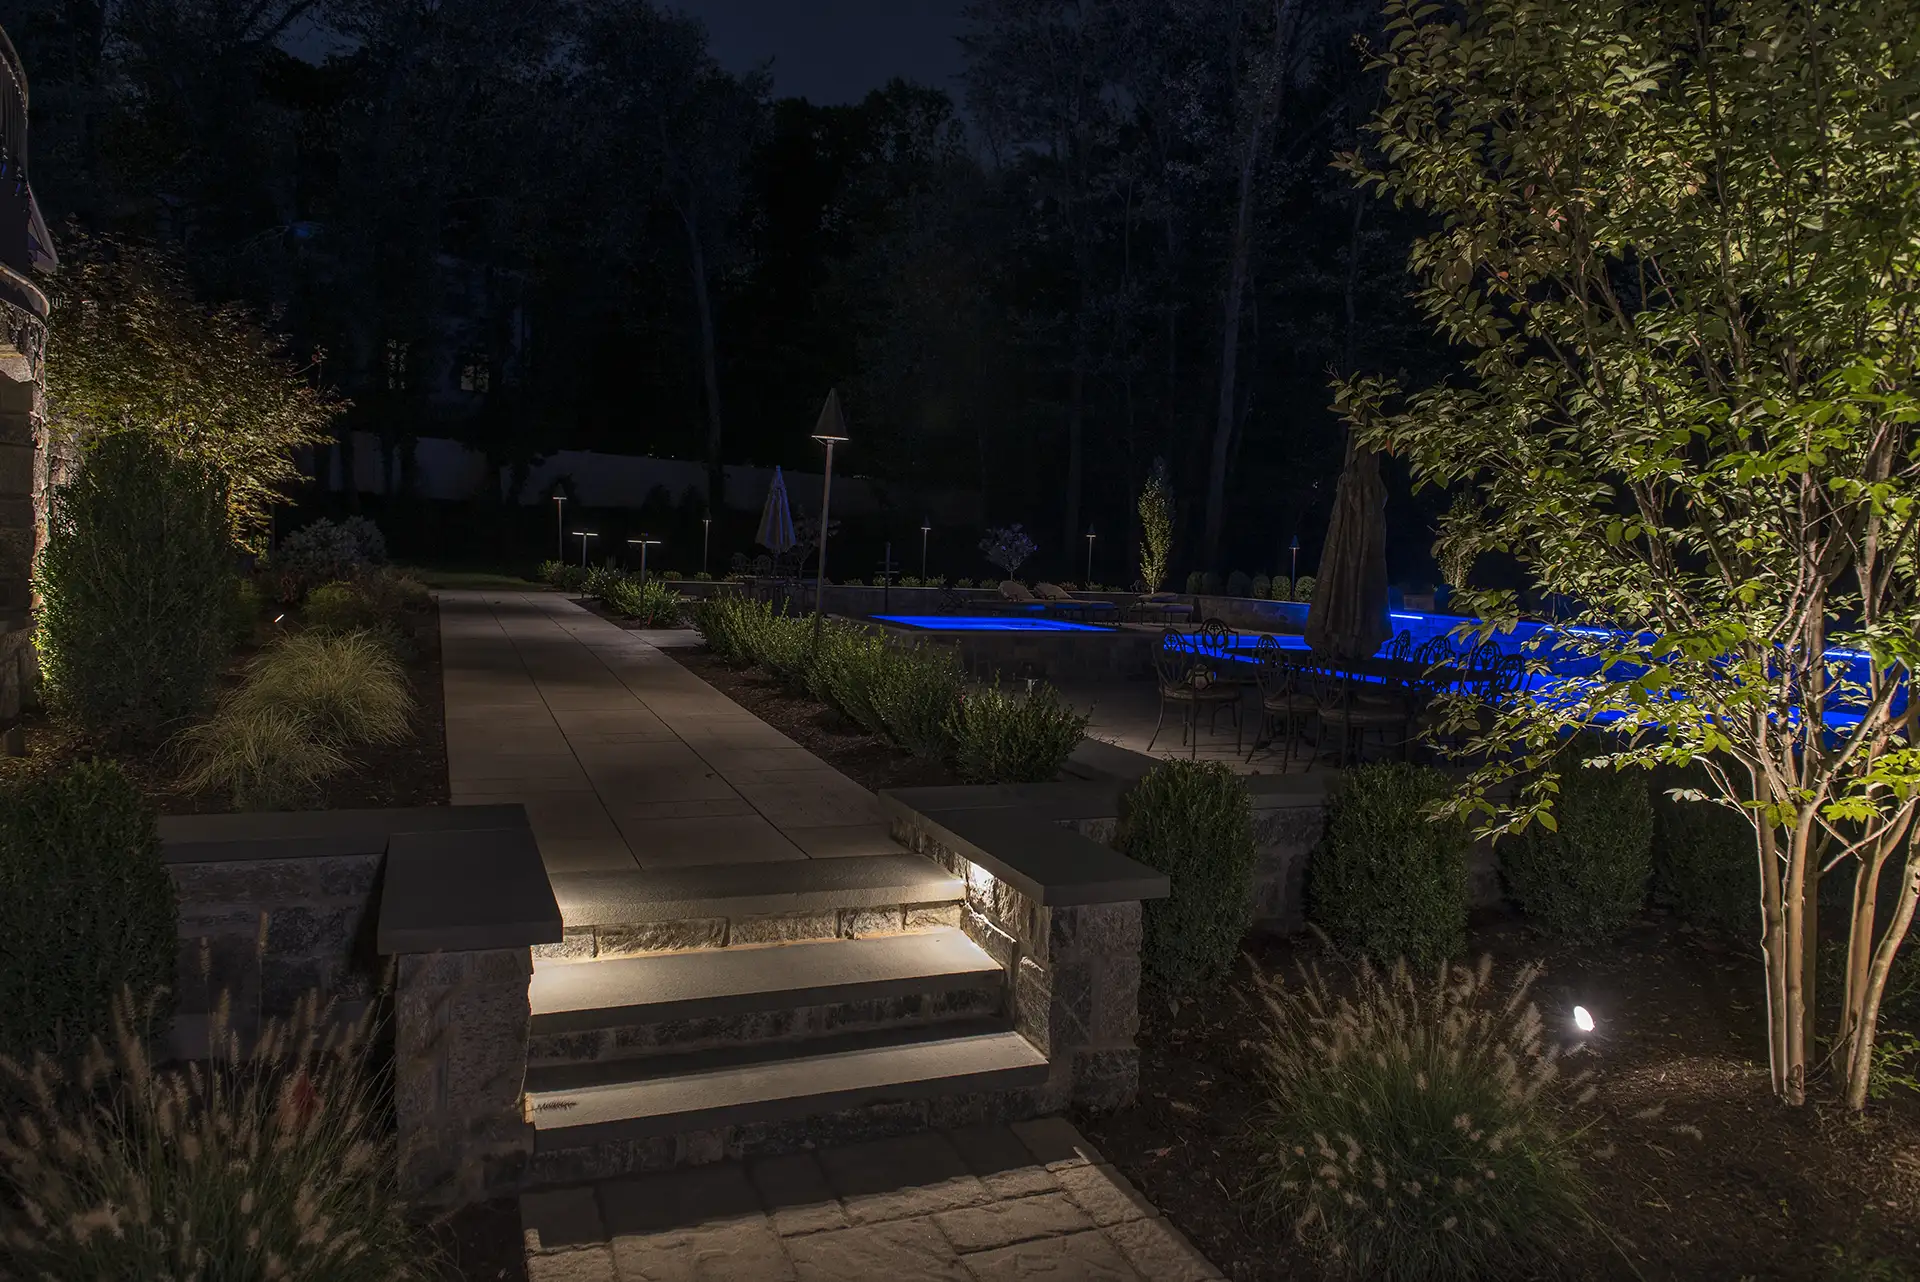 Prioletti residence image 5 back walkway path lighting Lighthouse Outdoor Lighting and Audio Vail CO